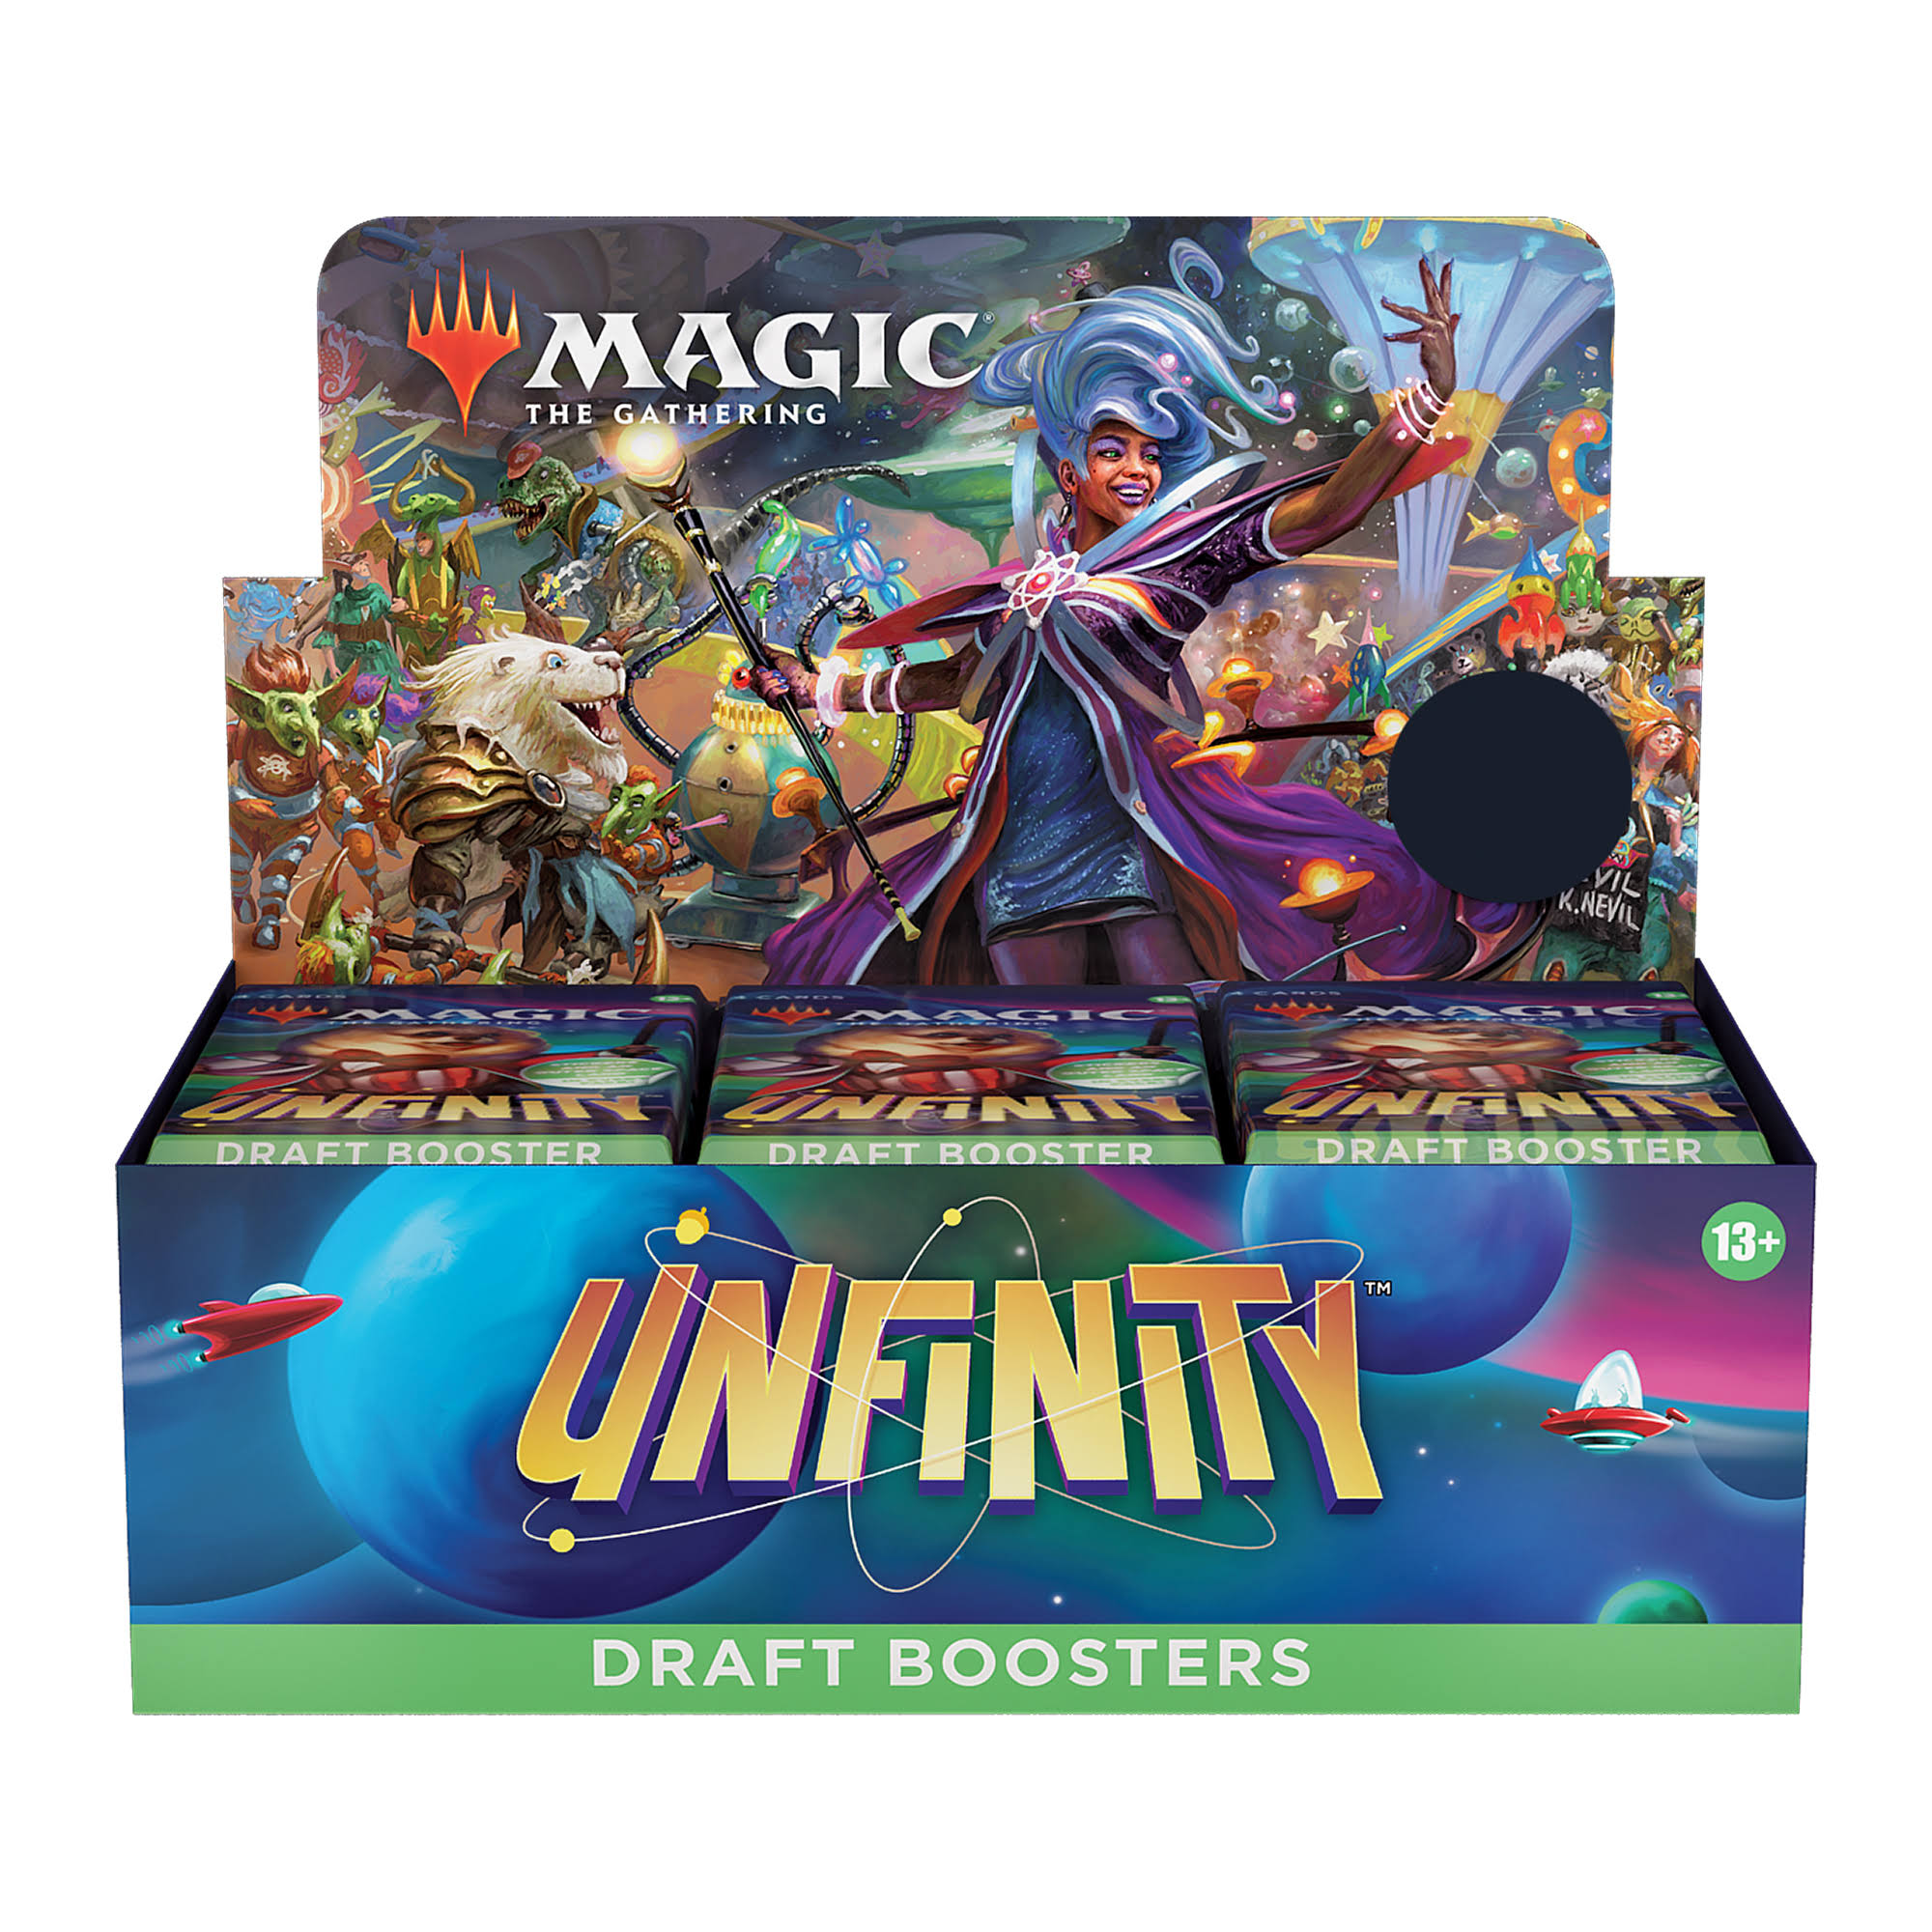 Magic The Gathering - Unfinity - Draft Booster Box